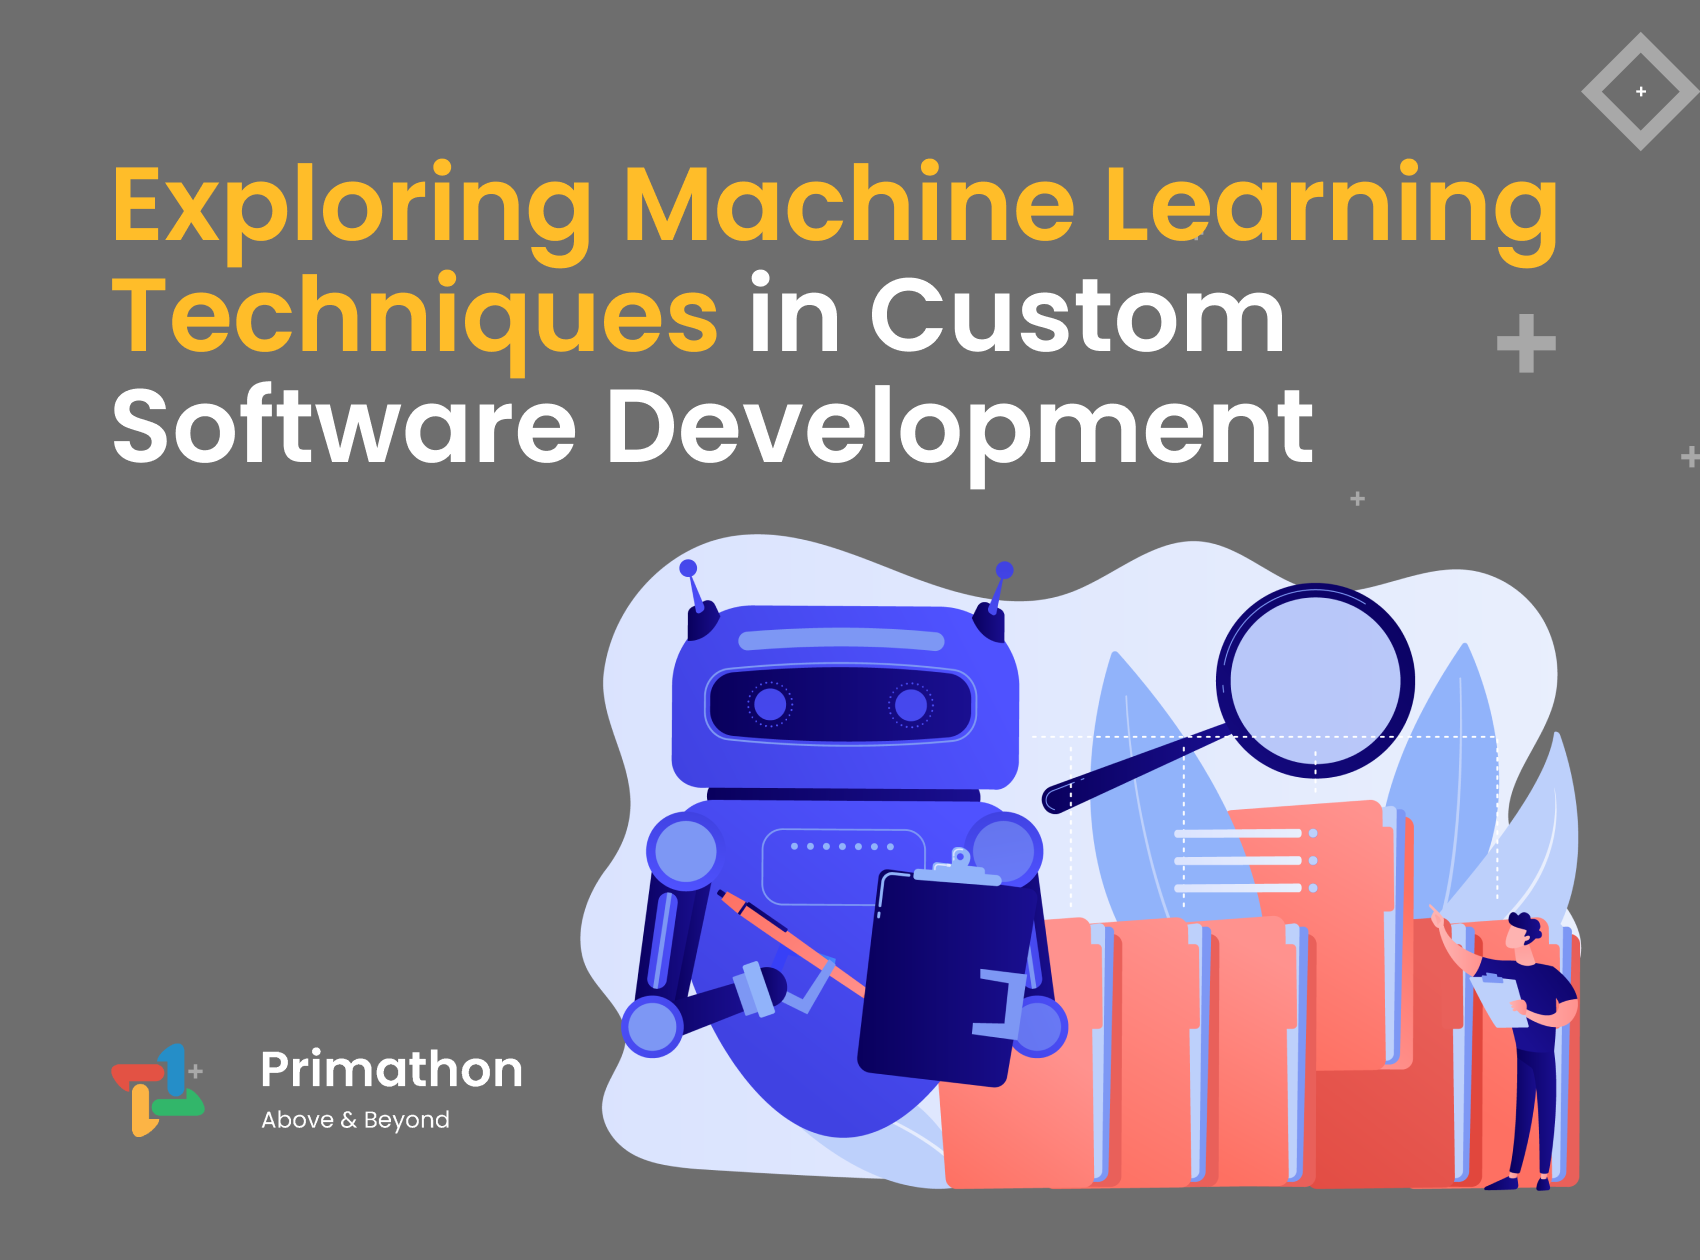 Exploring Machine Learning Techniques in Custom Software Development